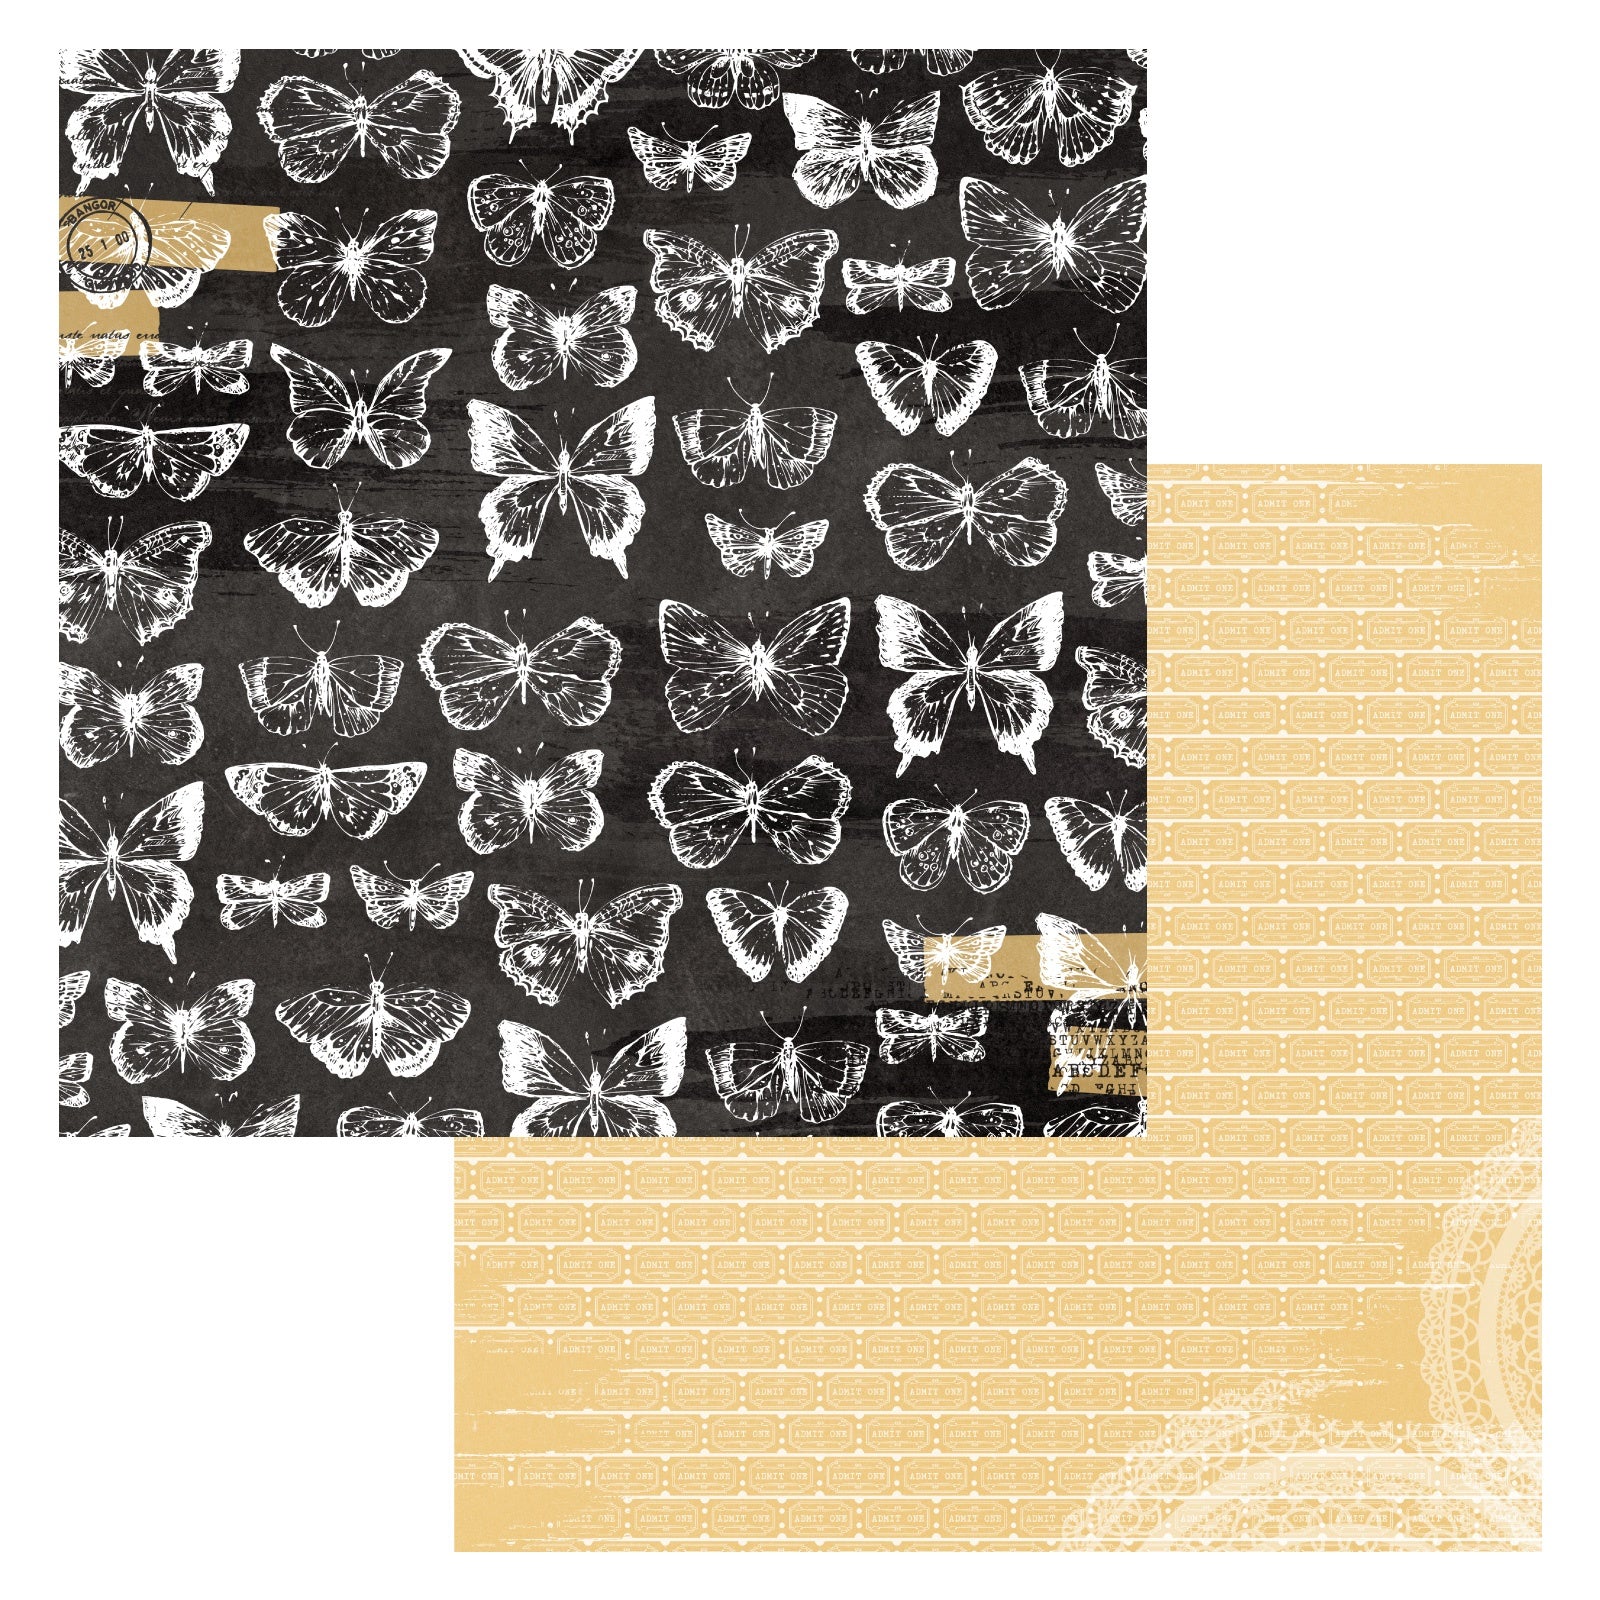 Butterfly Scrapbook Paper 8.5 x 11 Inches, 40 Pages: 20 Double Sided Sheets  with 10 Designs